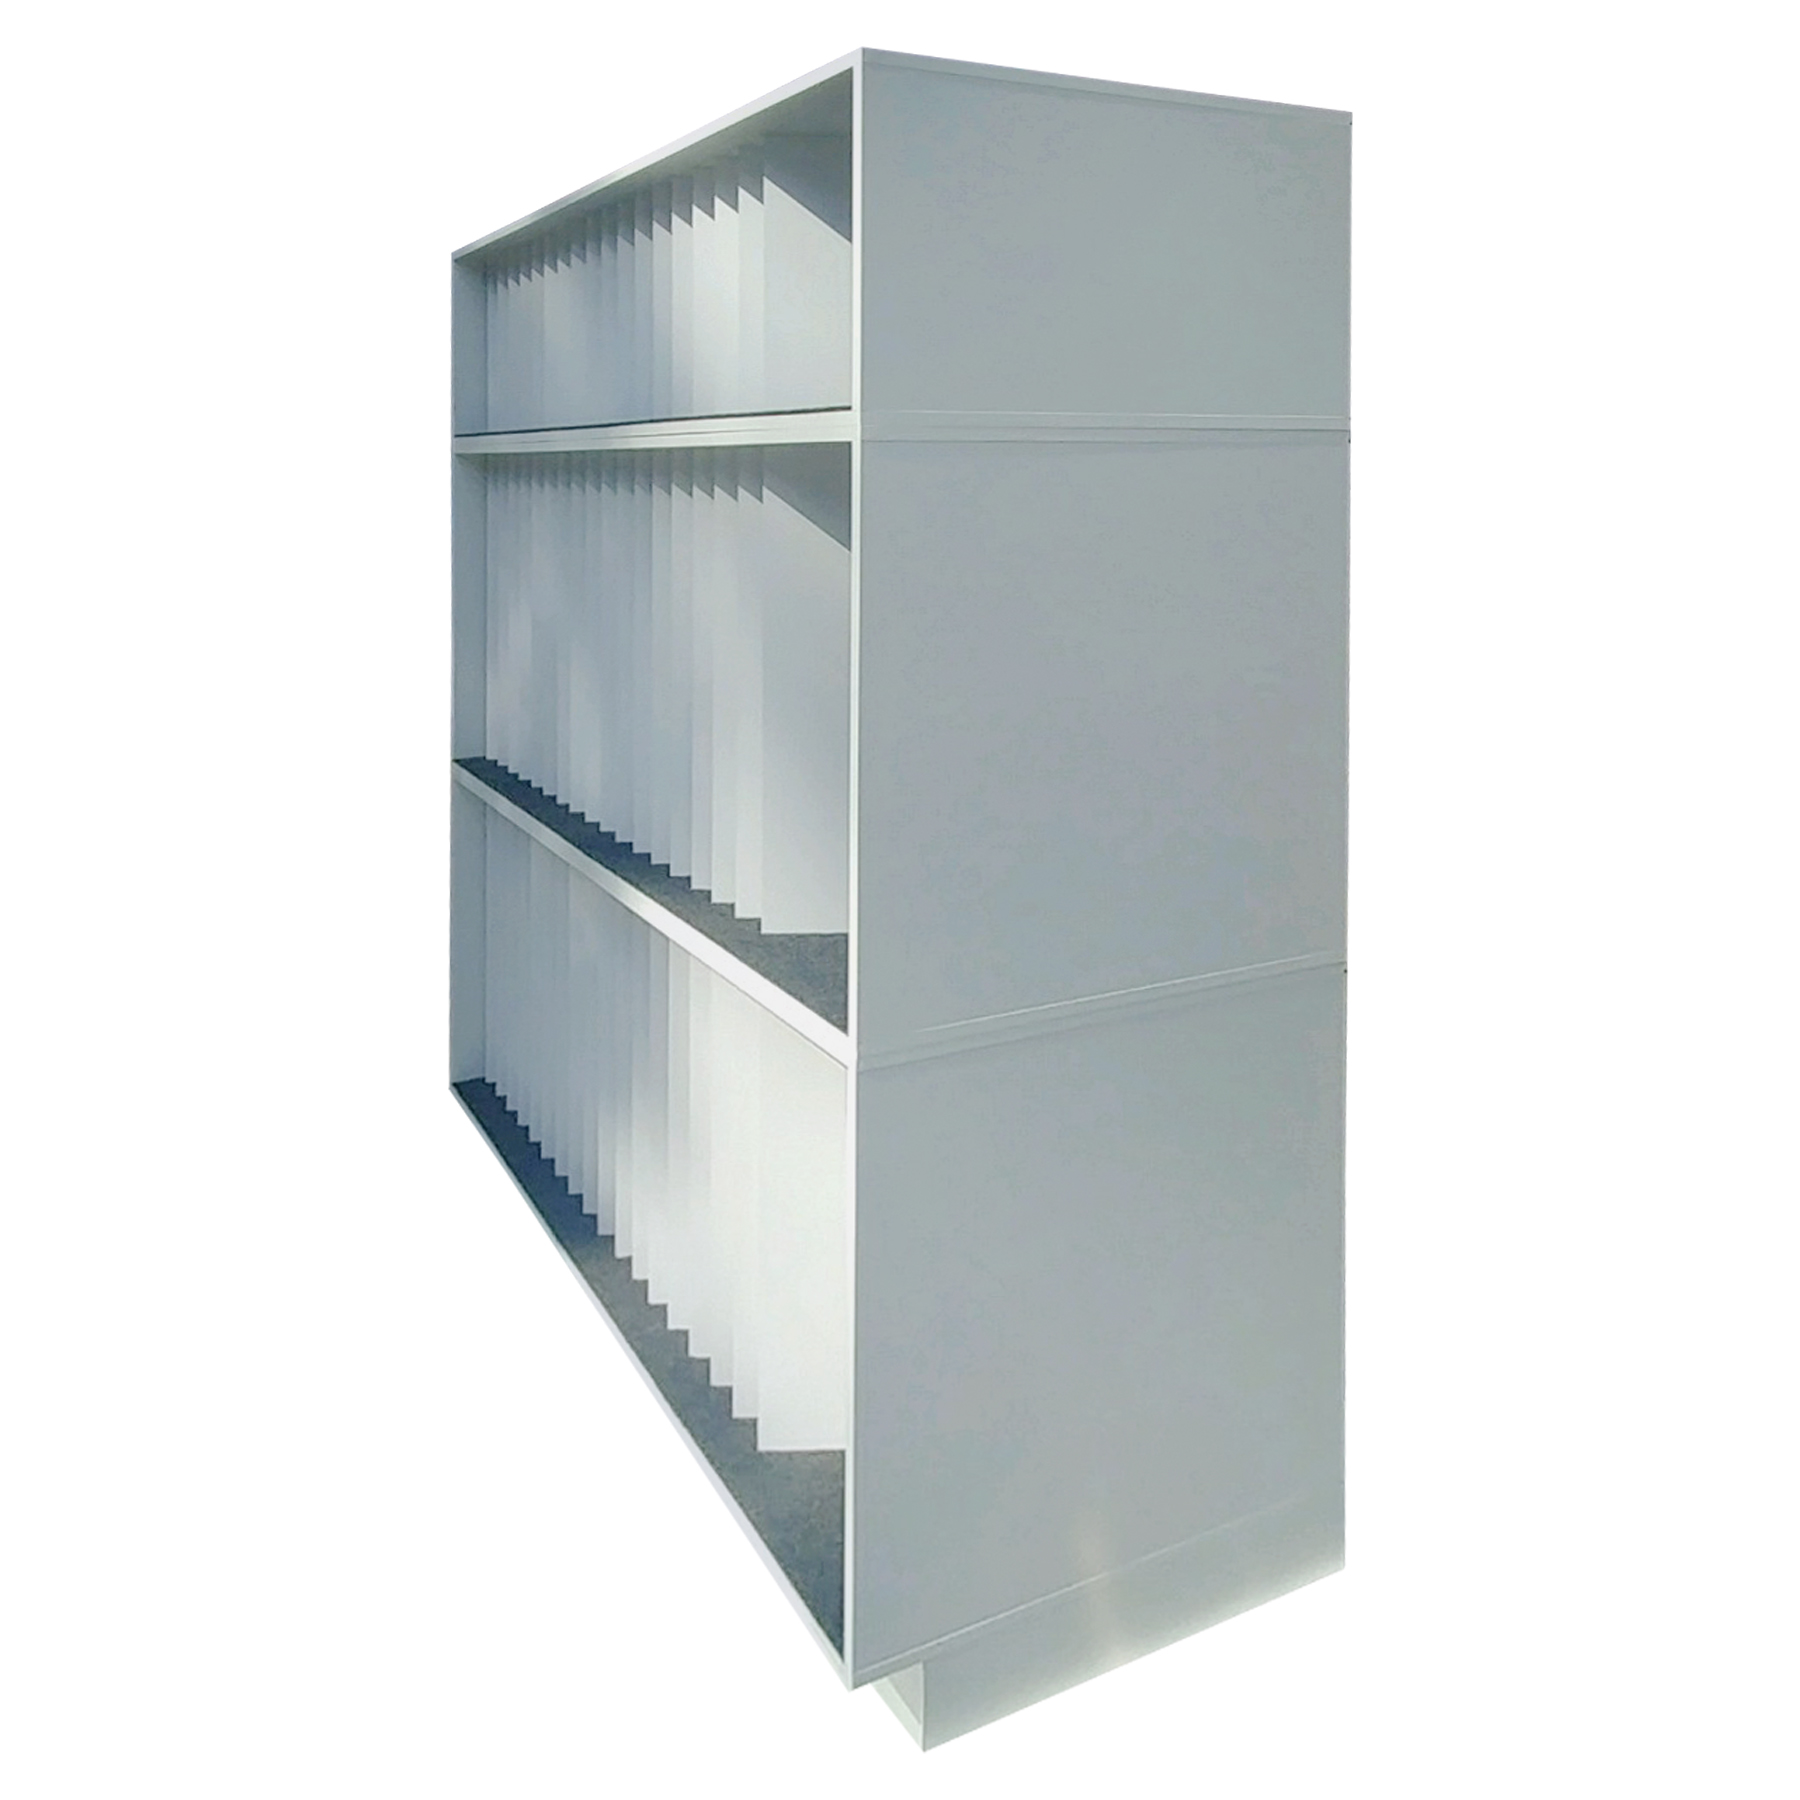 Upright Shelf Partition System Display Rack Tower Stores Library of Tile Stone or Hardwood Samples